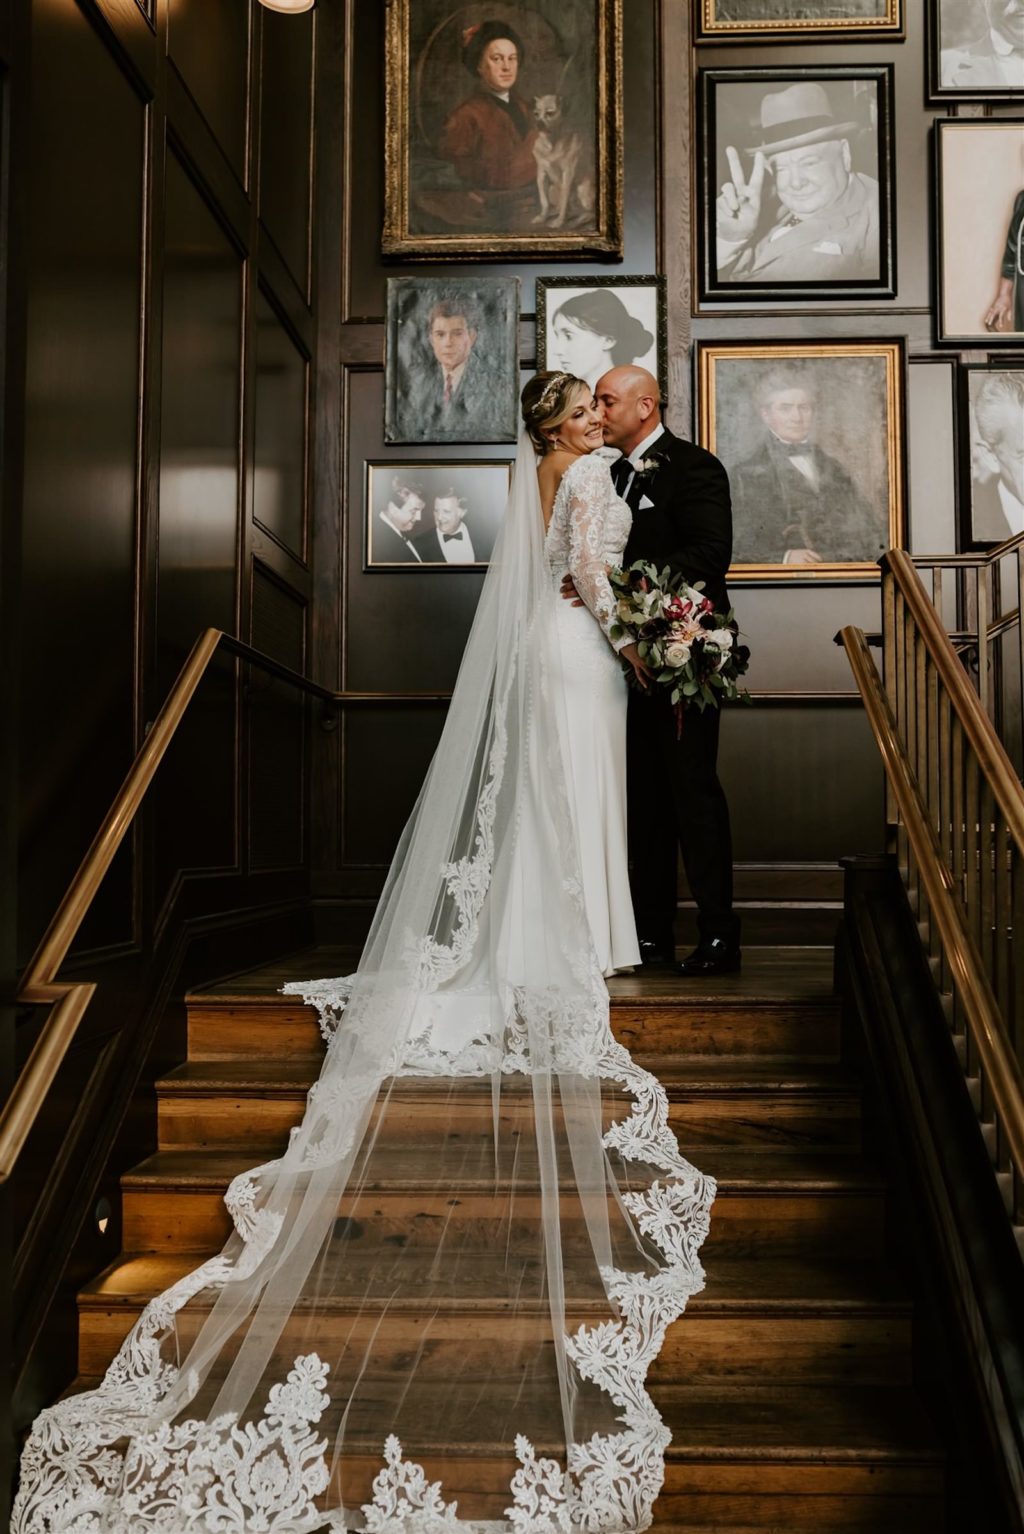 Indoor Bride and Groom Staircase Portrait at Industrial Loft Wedding | Groom Wearing Classic Black Suit Tux | V Neck Long Sleeve Lace Sheath Bridal Gown with Long Cathedral Lace Veil